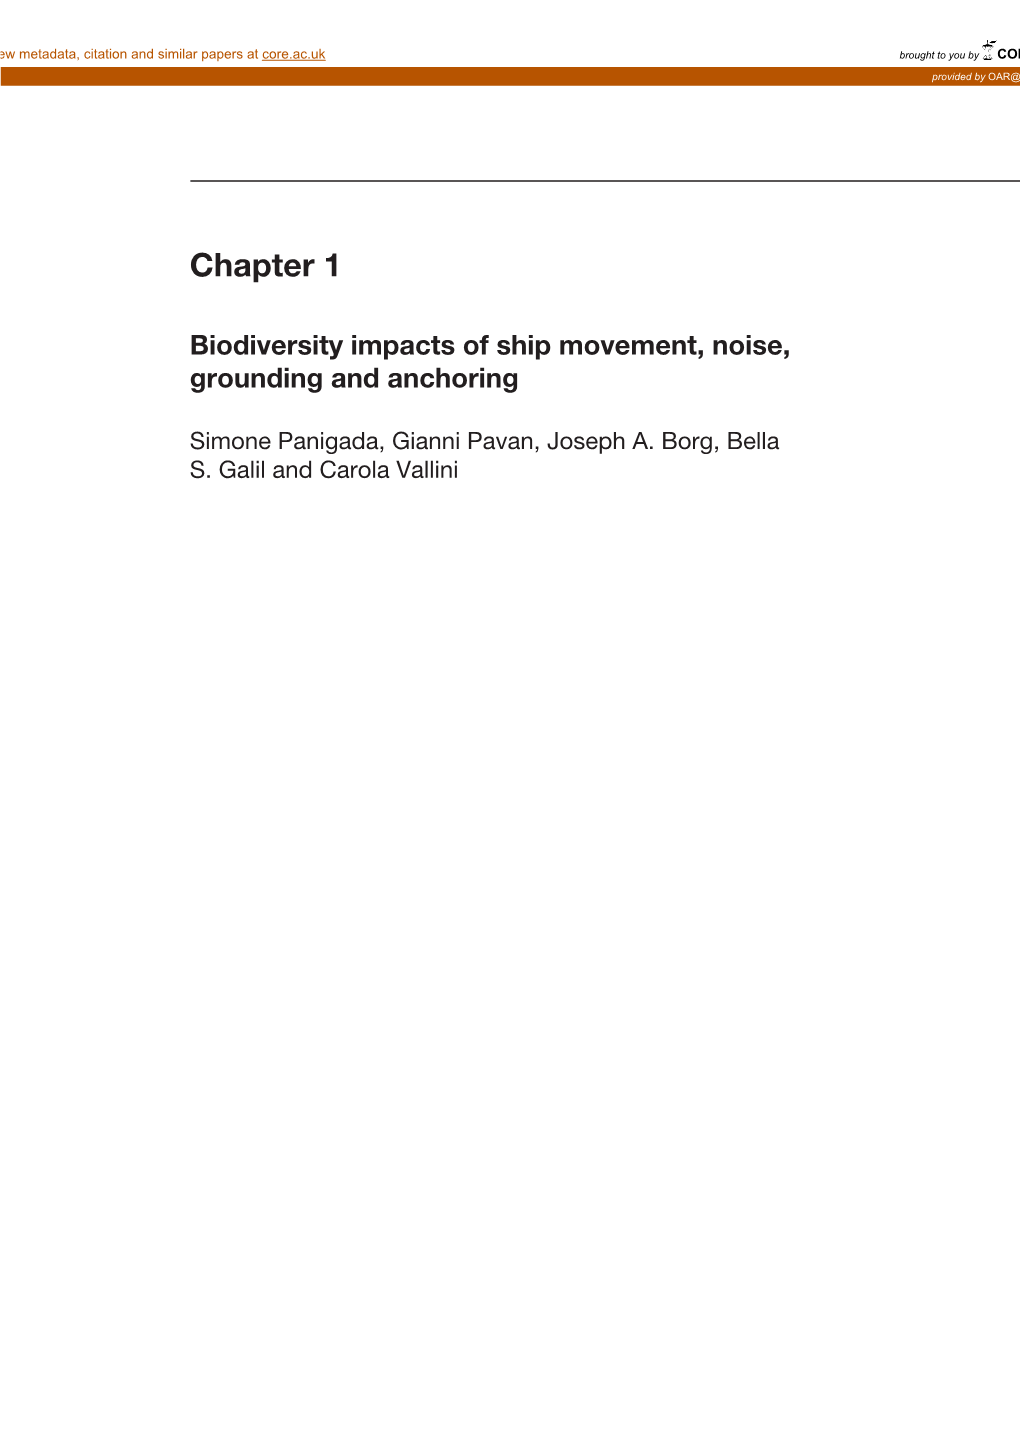 Chapter 1 Biodiversity Impacts of Ship Movement, Noise, Grounding and Anchoring